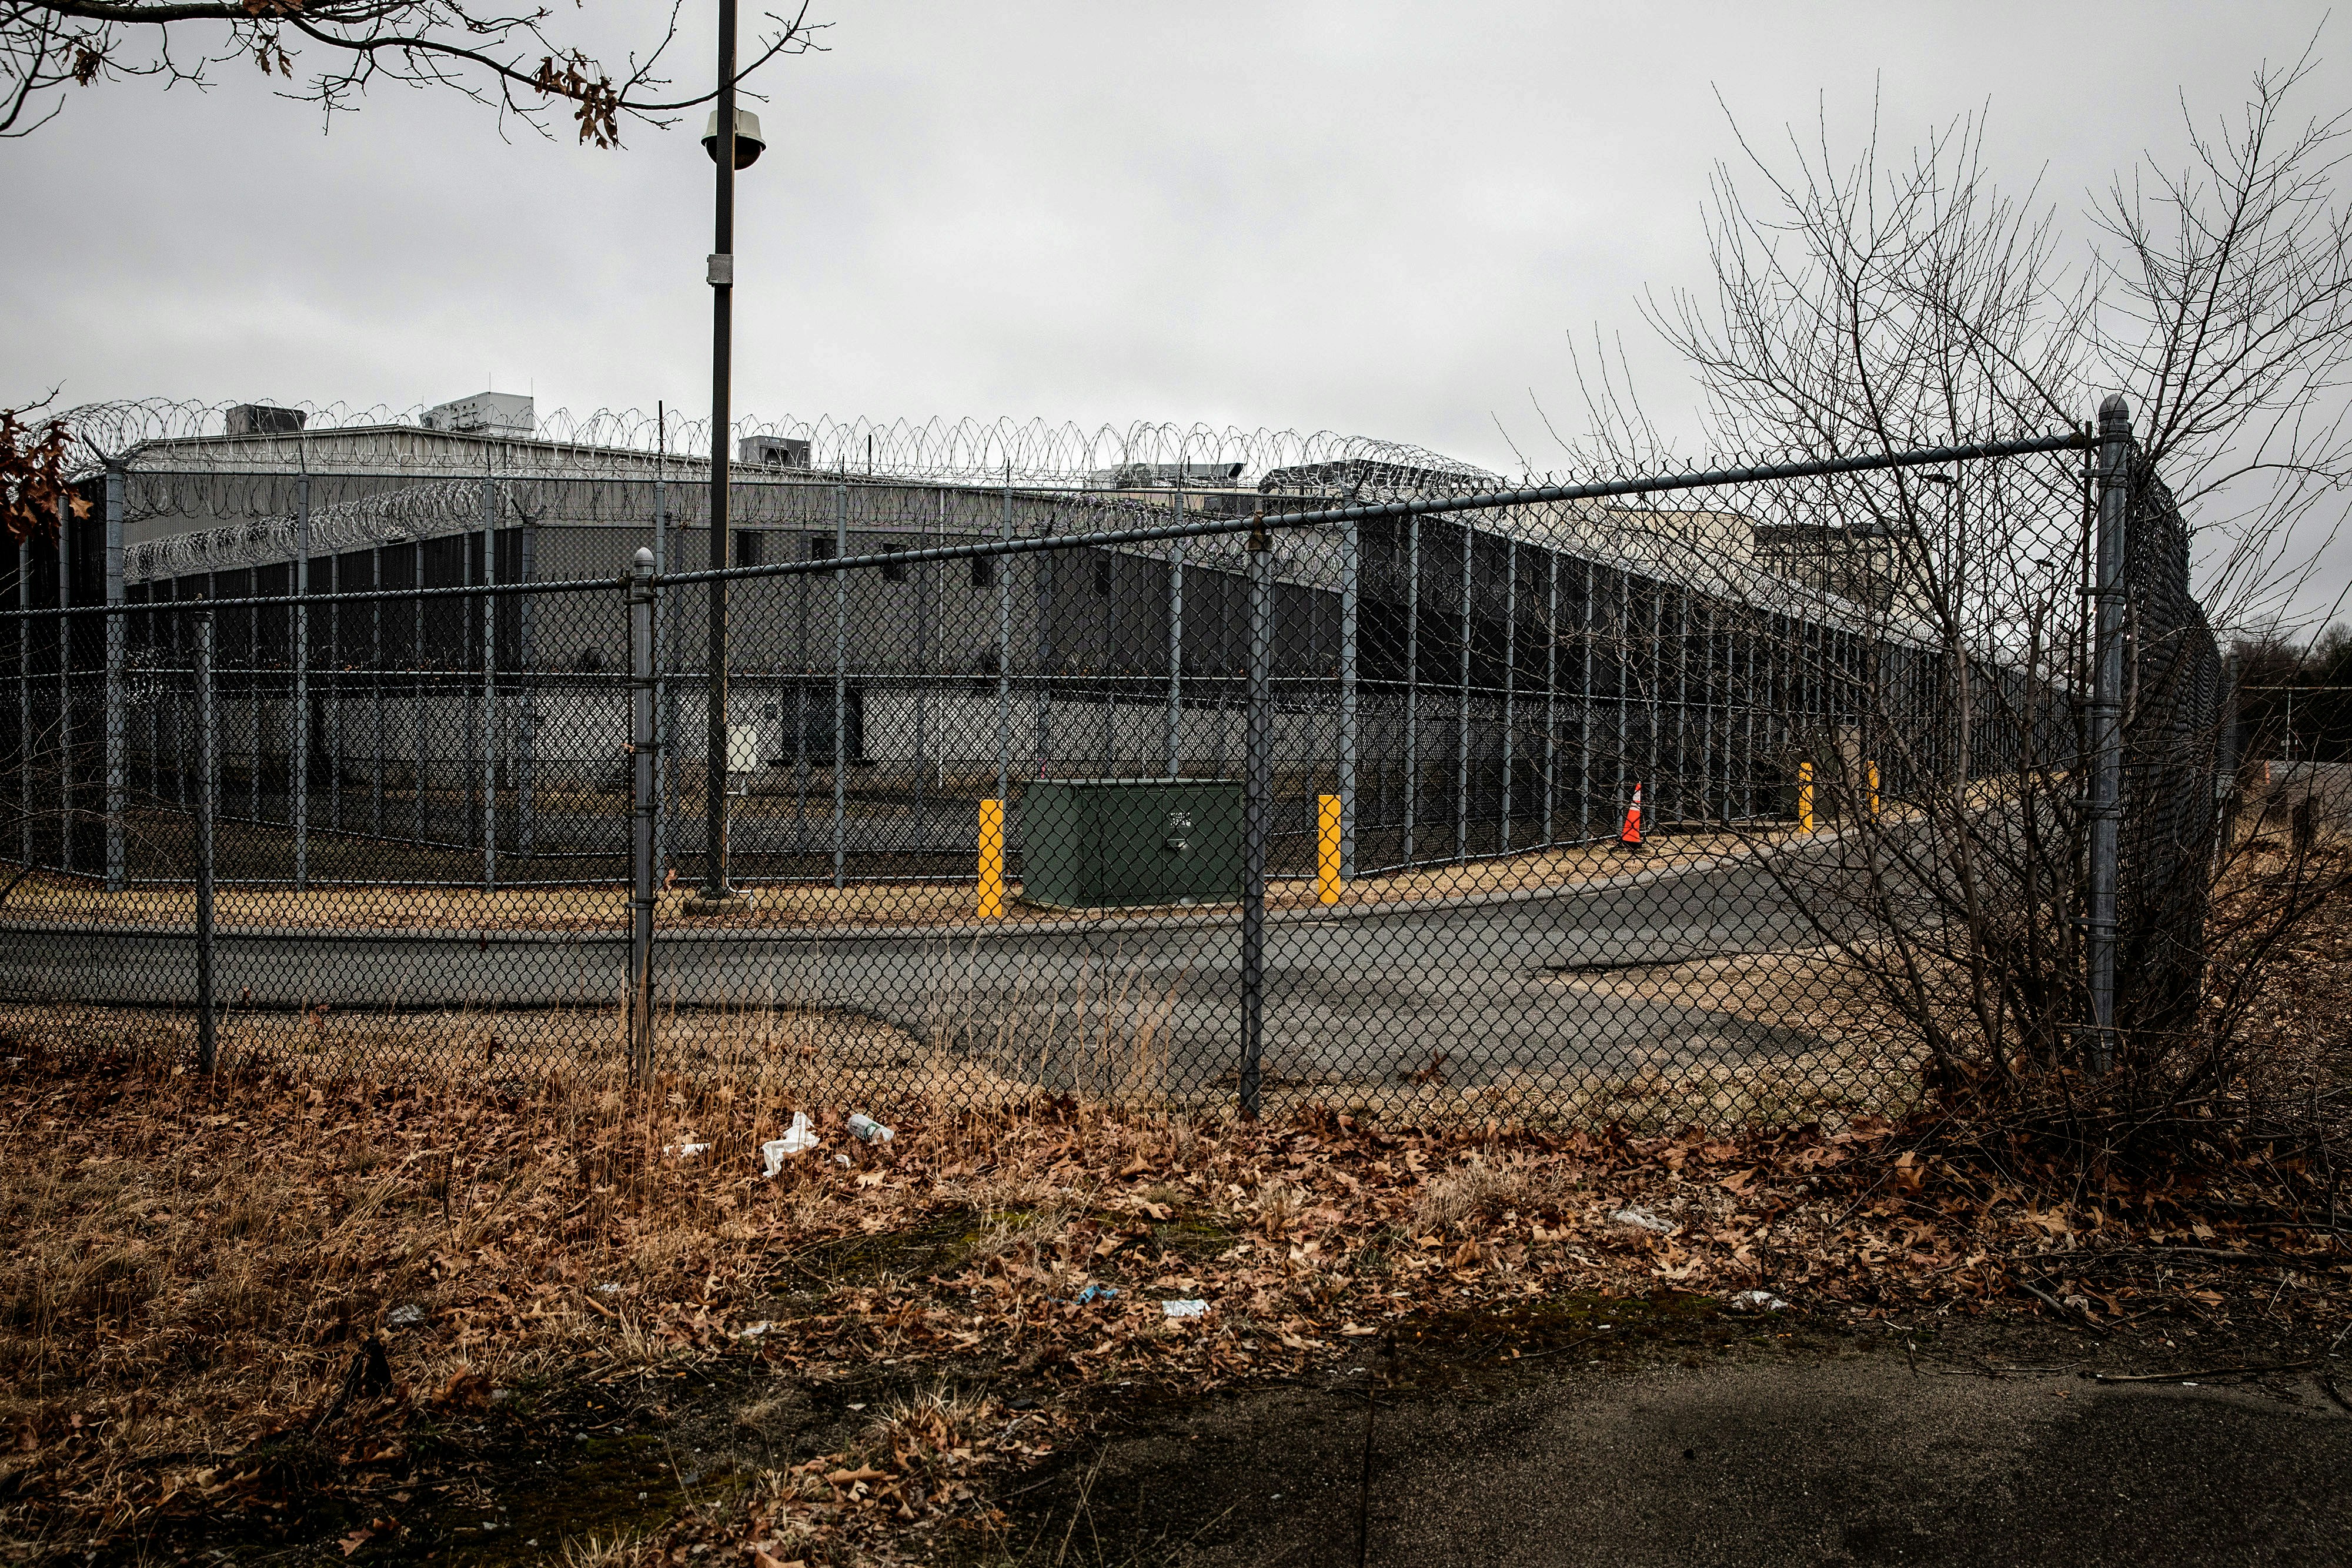 Ludlow, MA  -- 03/19/2022  -- A view of the Hampden County Sheriffs Department/Correction Center and Stonybrook Stabilization and Treatment Center, on March 19, 2022, in Ludlow, Massachusetts. (Kayana Szymczak for The Intercept)